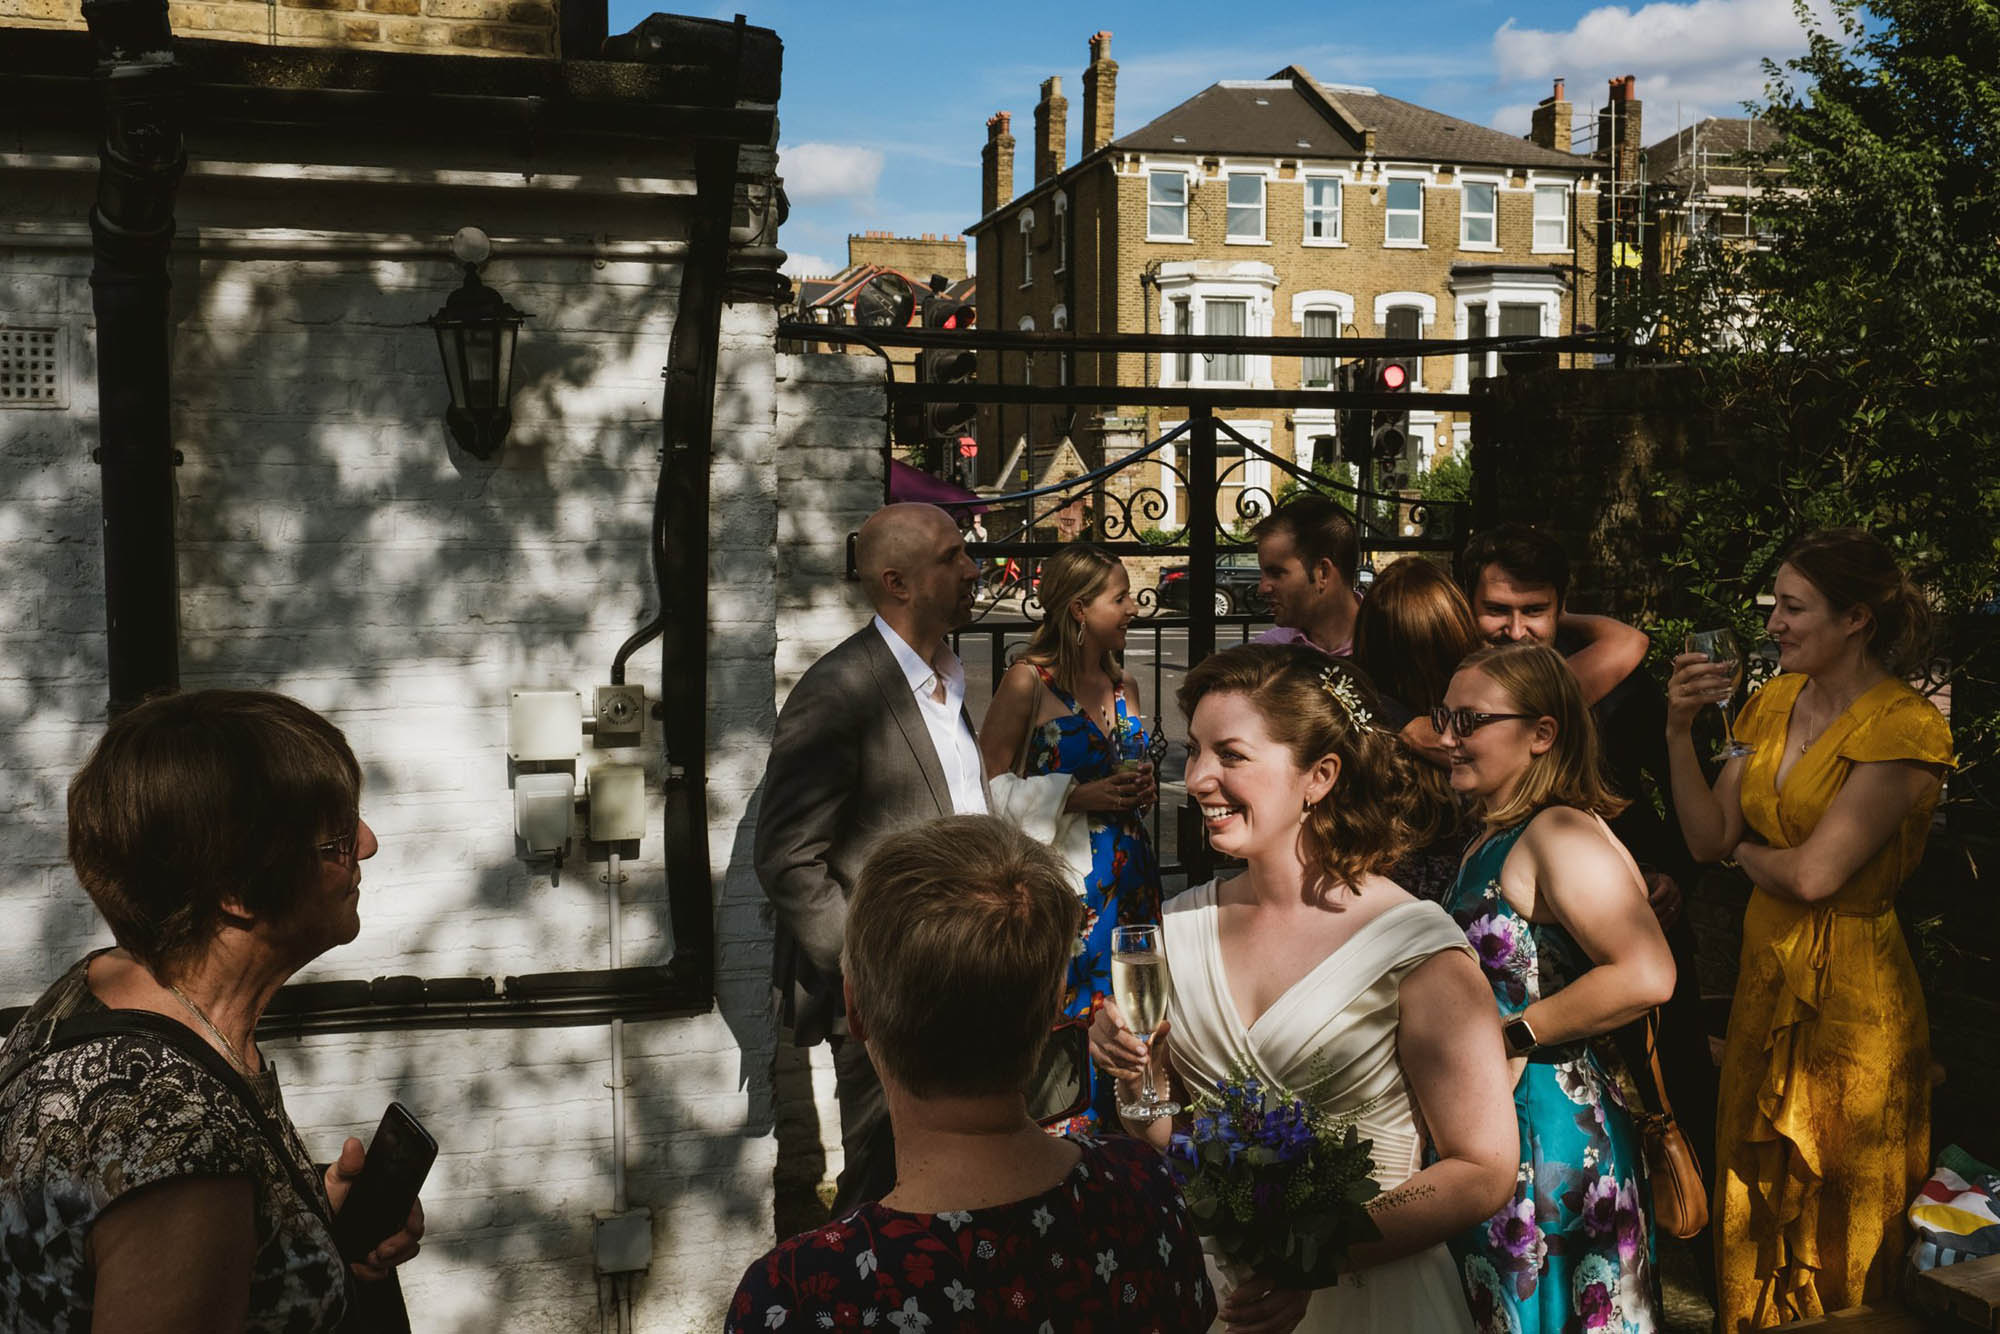 A bride surrounded by friends and family chatting in dappled sunshine at the gates of the wedding venue. By York Place Studios